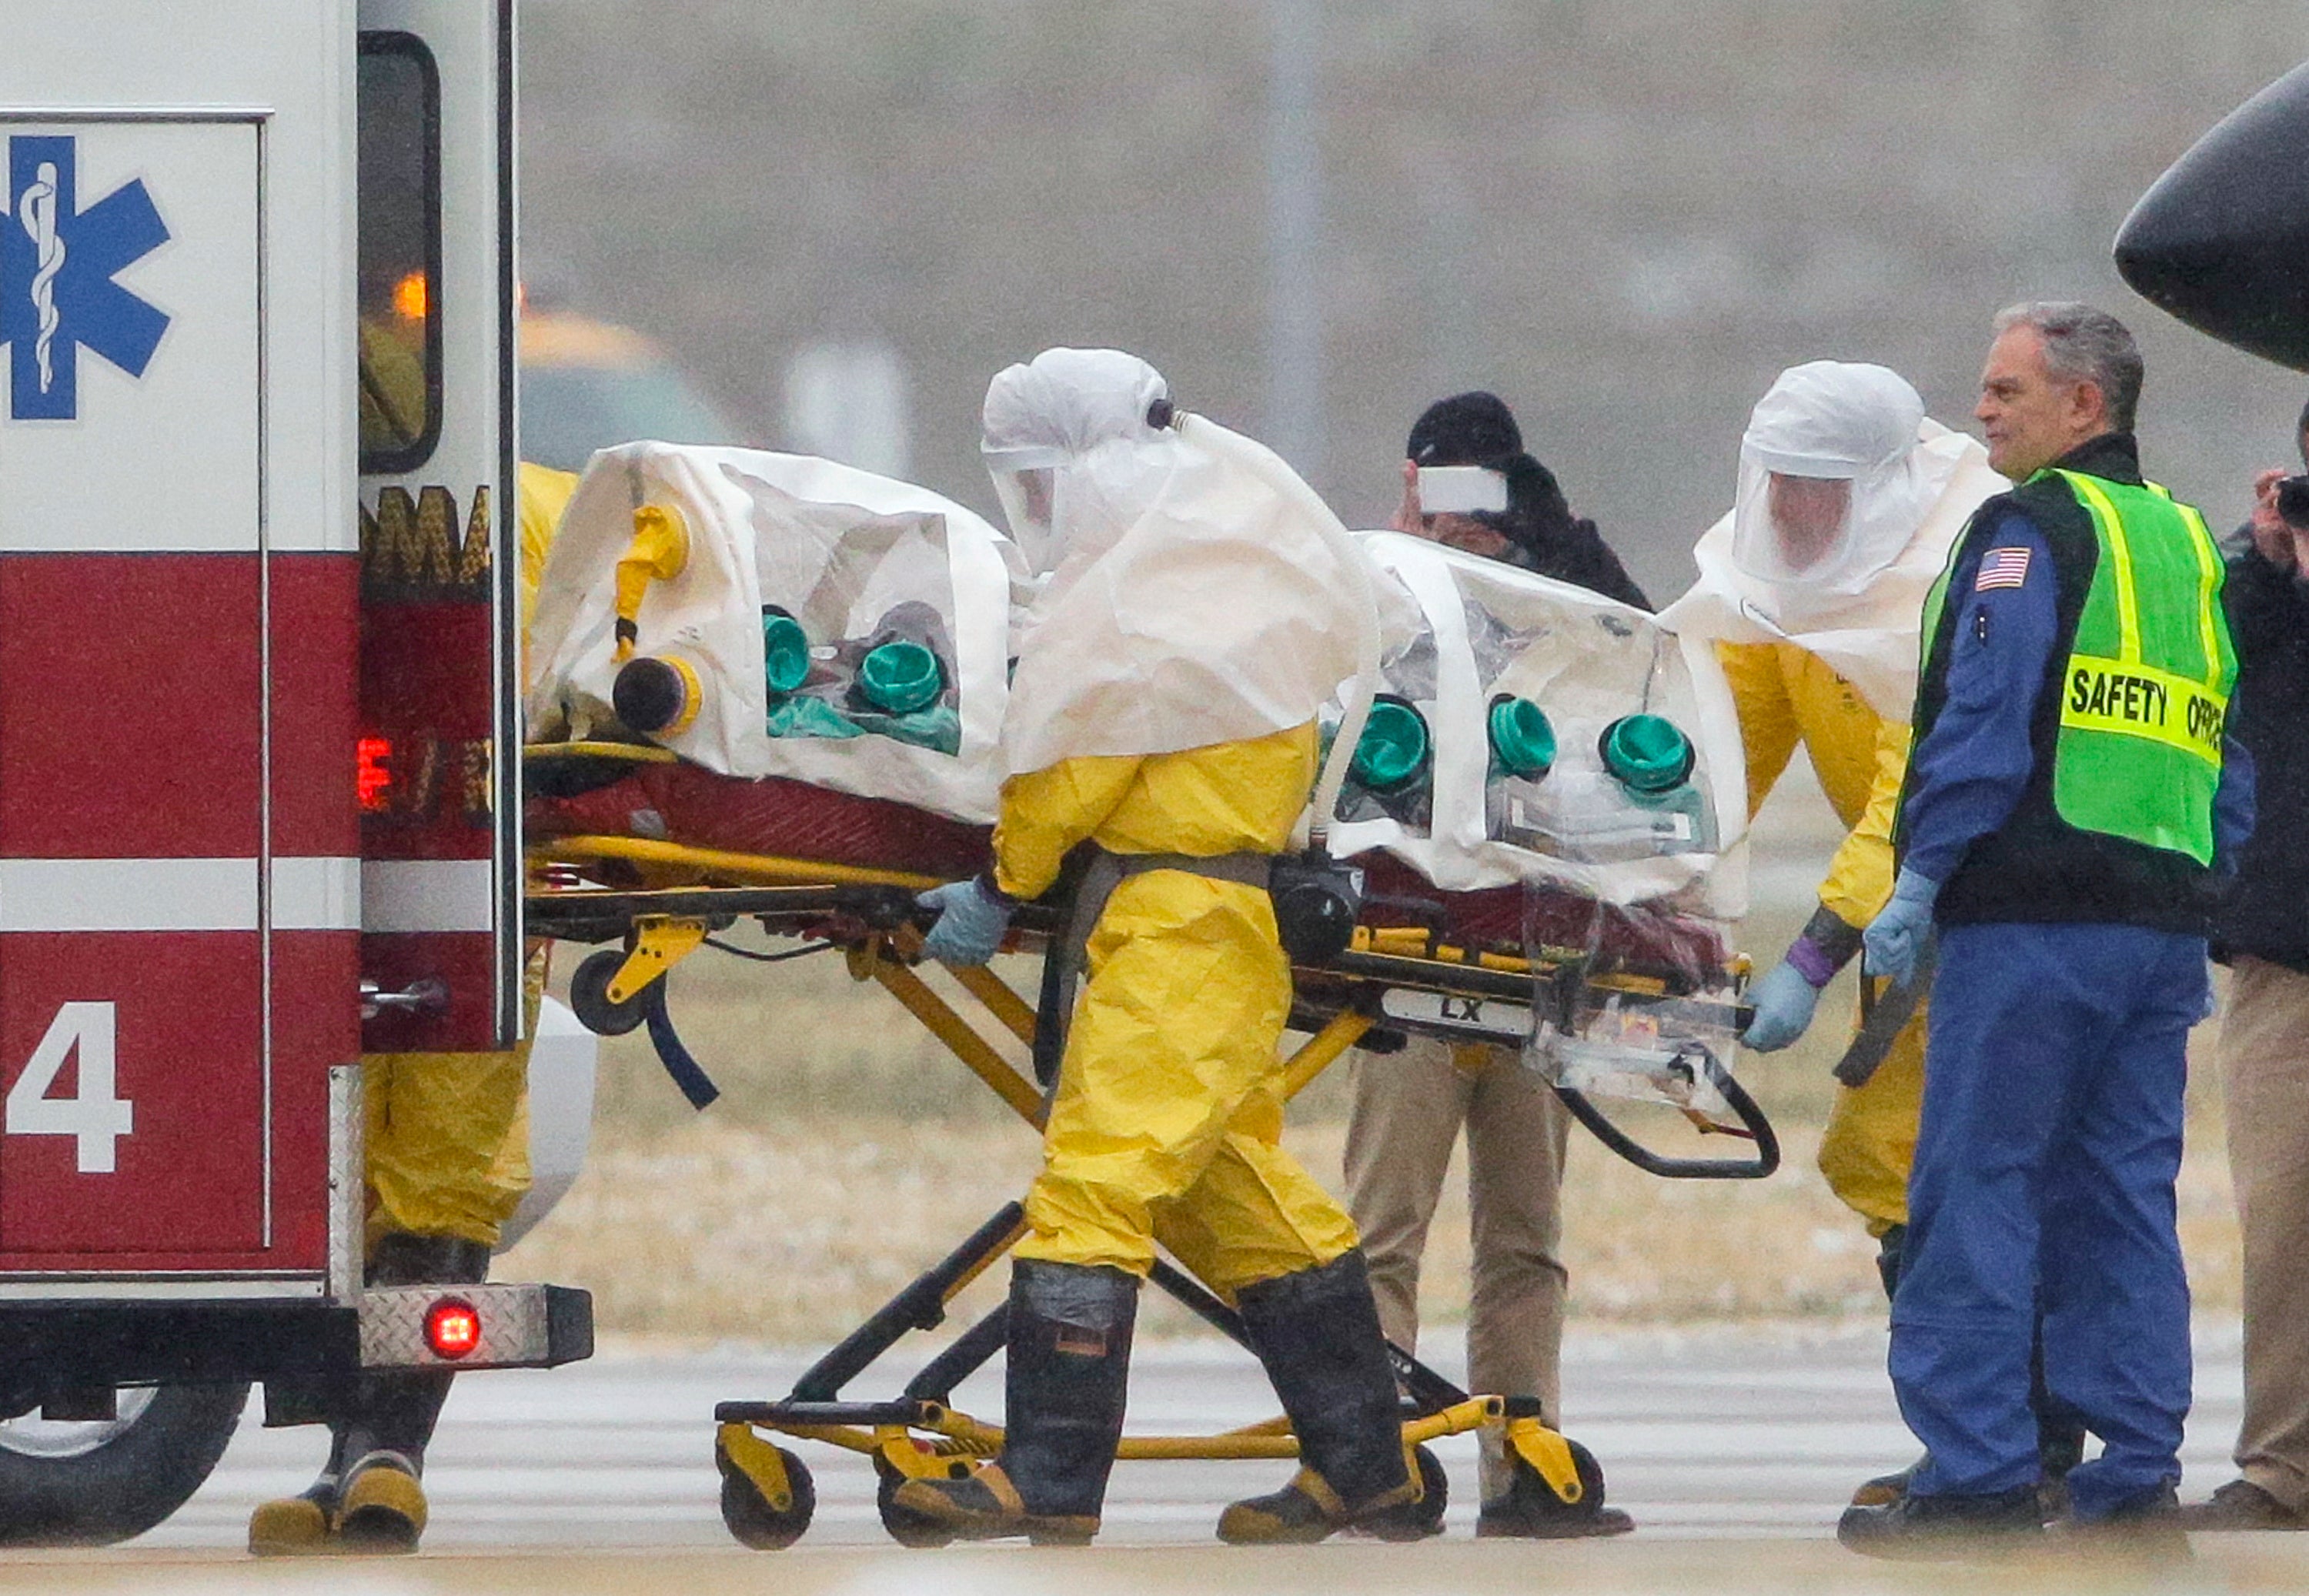 Health workers in protective suits transport Dr. Martin Salia to the Nebraska Medical Center in Omaha.